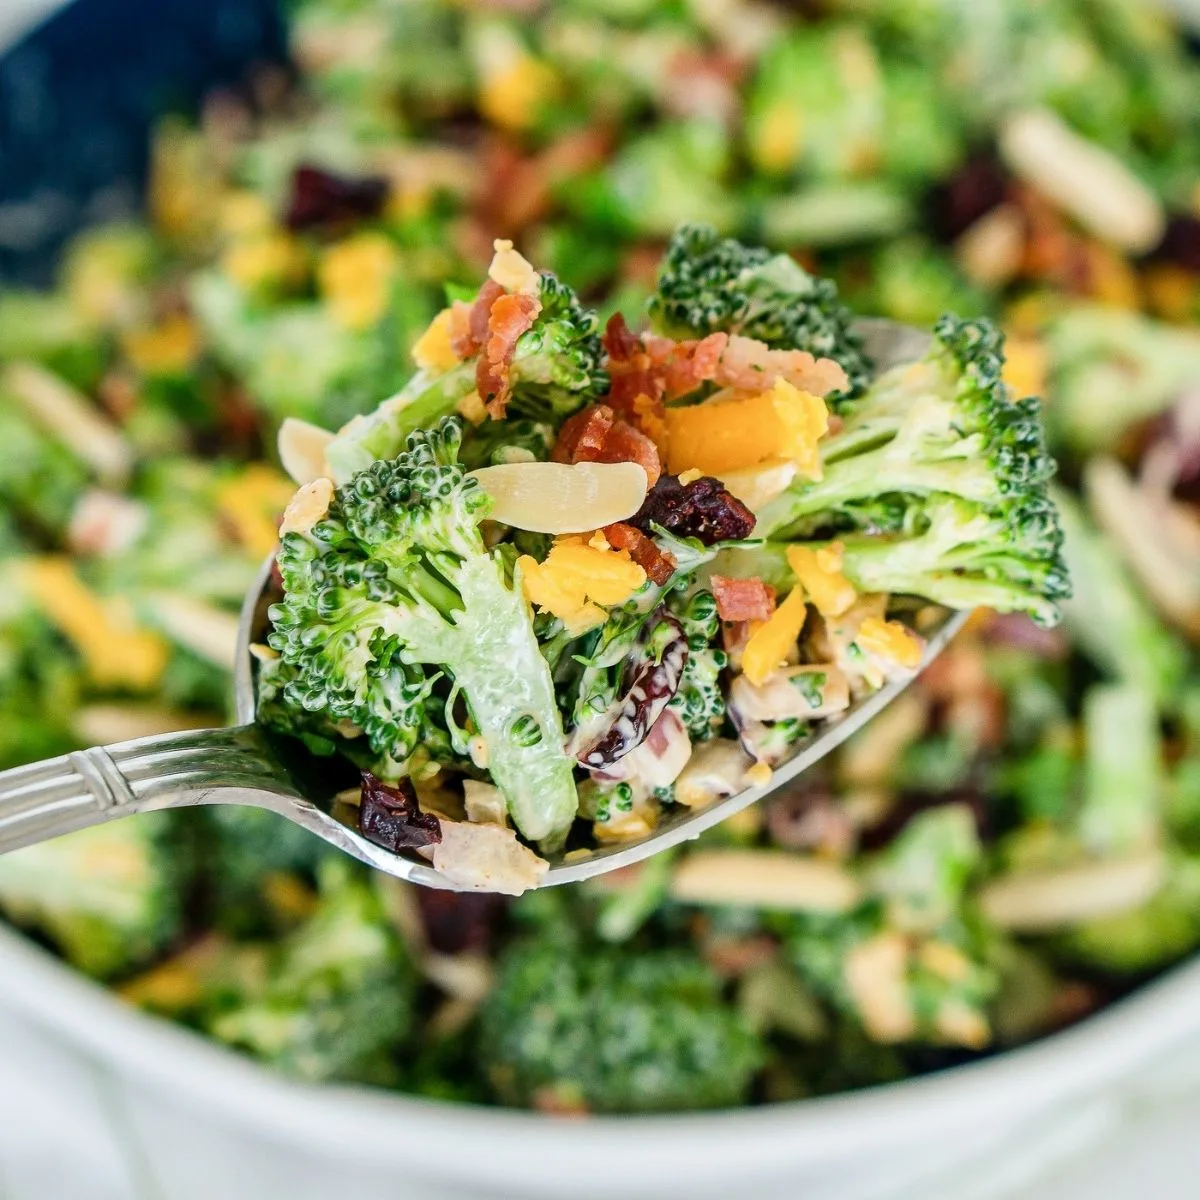 Serving spoon full of loaded broccoli salad with cheese, bacon, almonds, cranberries.